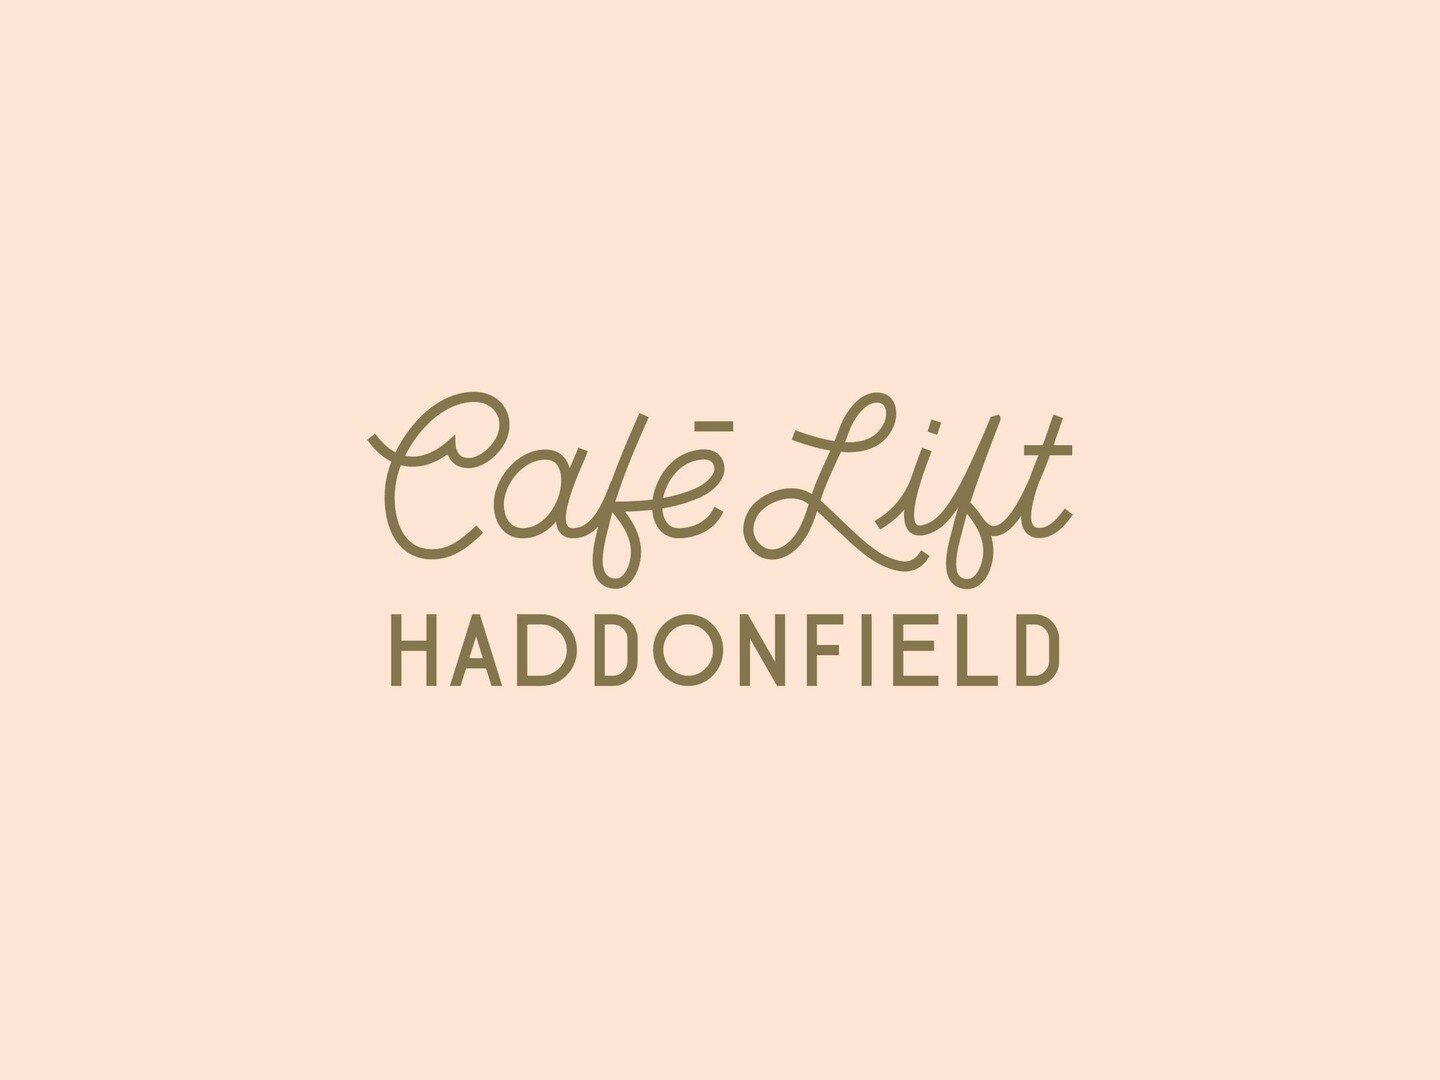 Happy Mother's Day to all those hardworking moms out there! Treat yourself to something good today 🥂✨⁠
-⁠
-⁠
🔗cafelifthaddonfield.com to place a takeout / delivery order⁠
⁠
&bull;  Breakfast/ Lunch/ Brunch All Day⁠
&bull;  Specialty Coffee Beverage